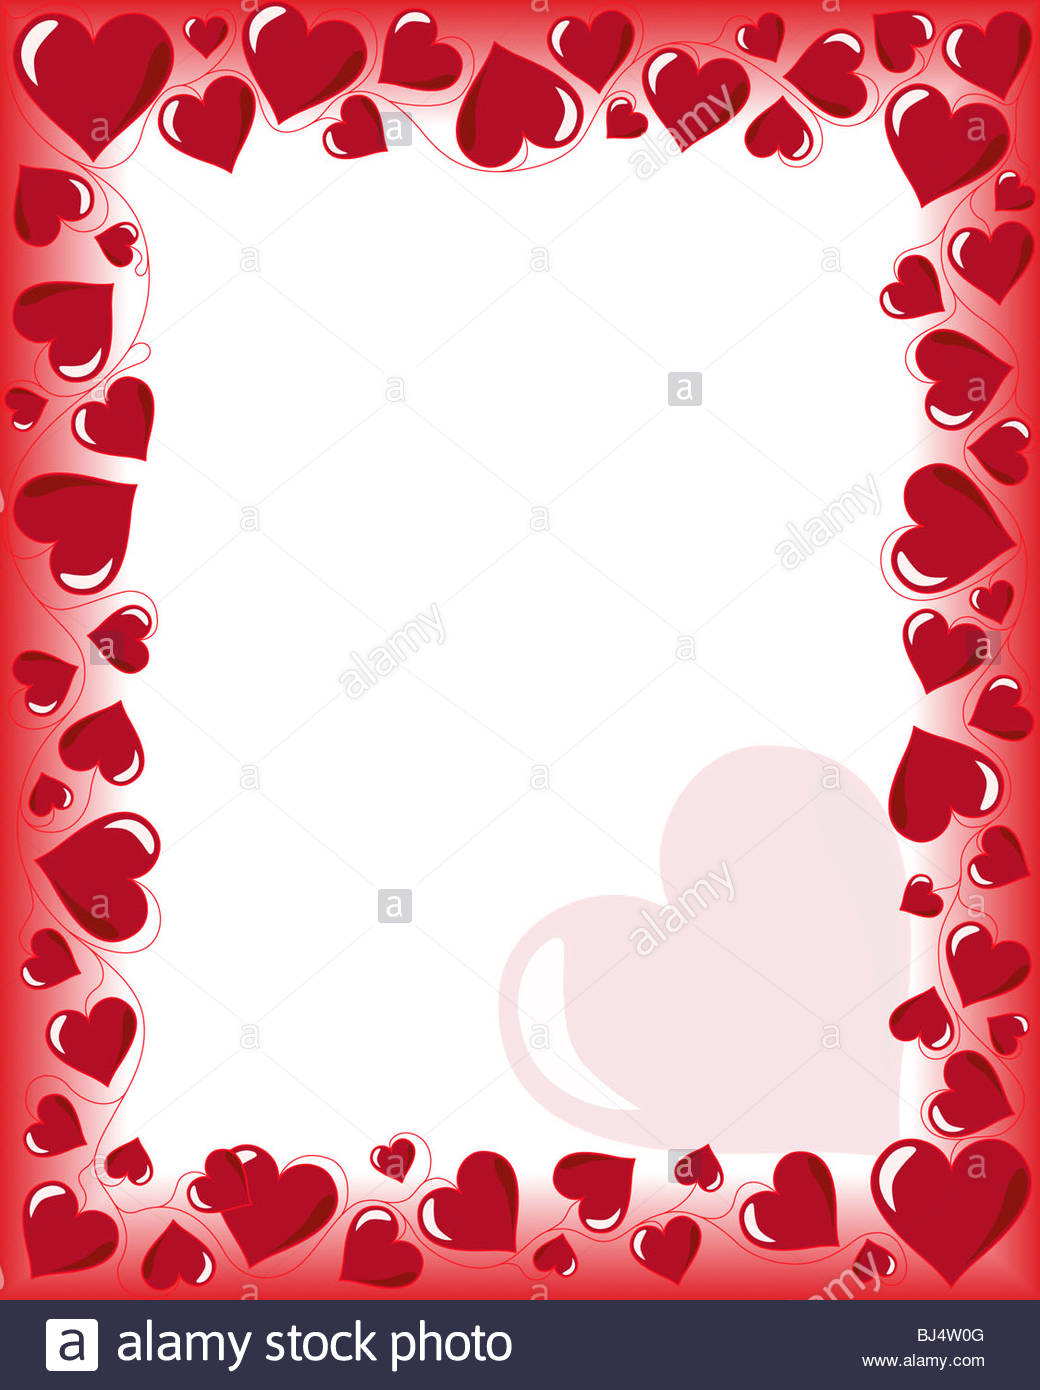 Valentines Day Background Frame With Heart Shaped Ornament